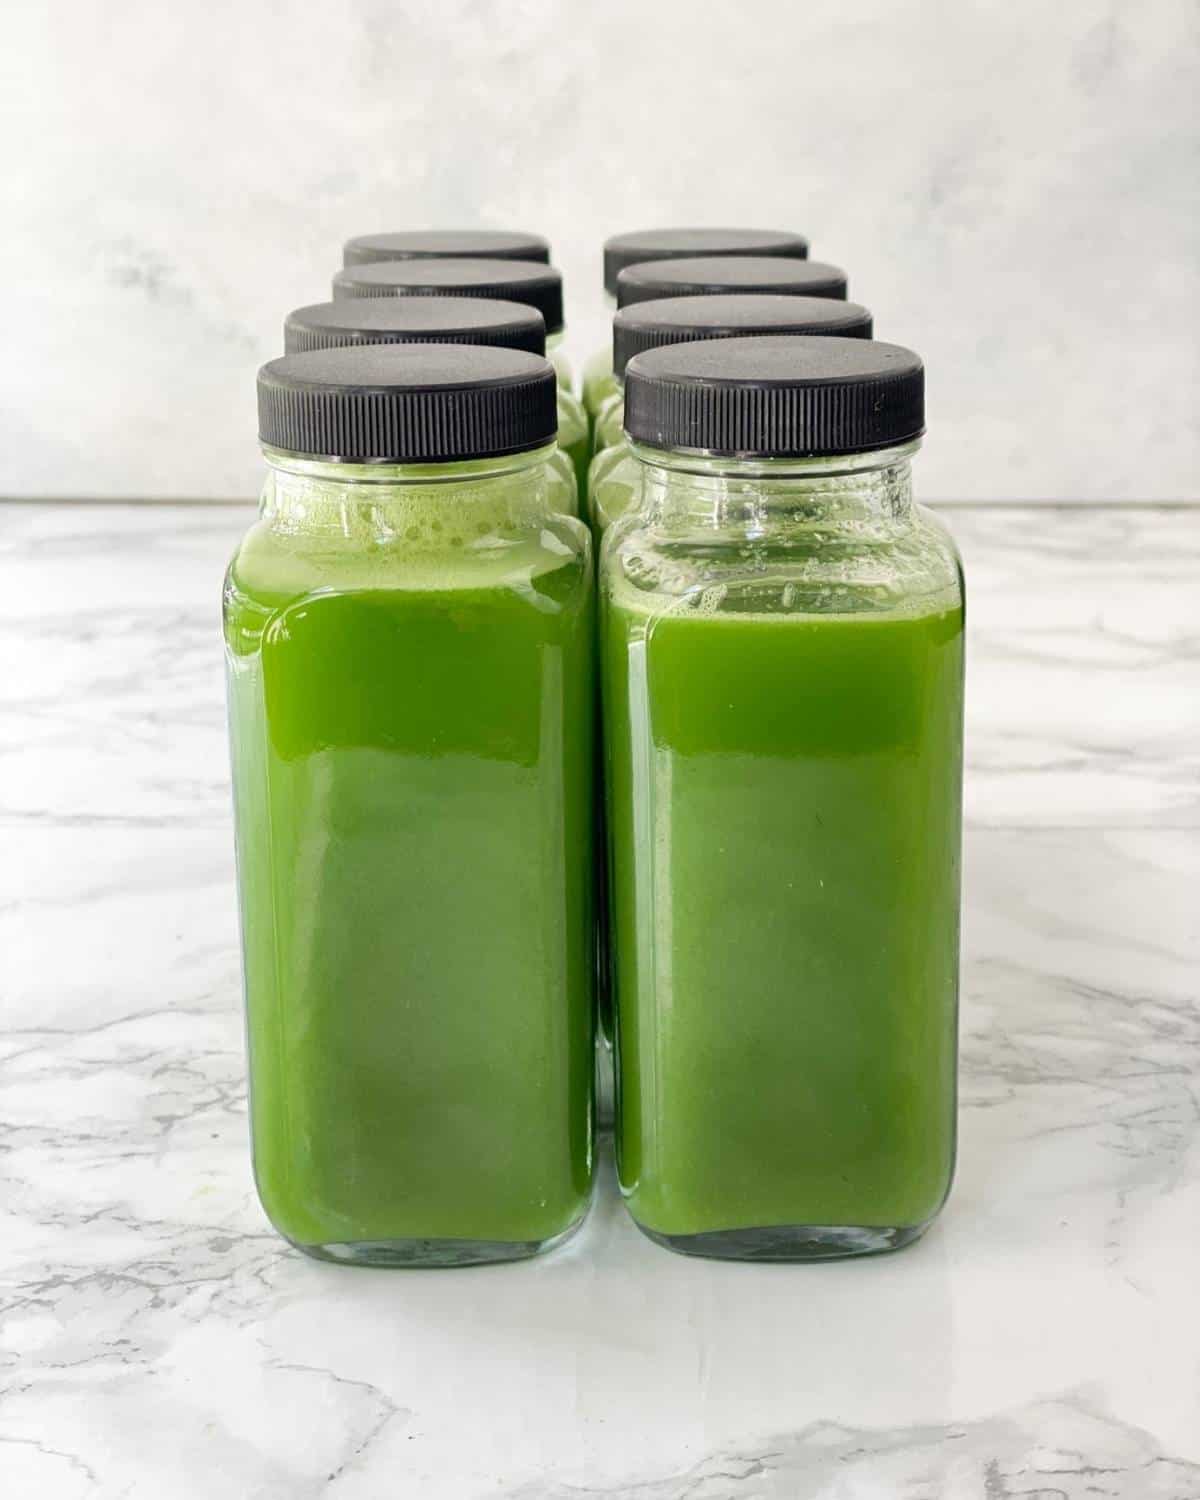 Juicer vs Blender: Which is Better? - Simple Green Smoothies